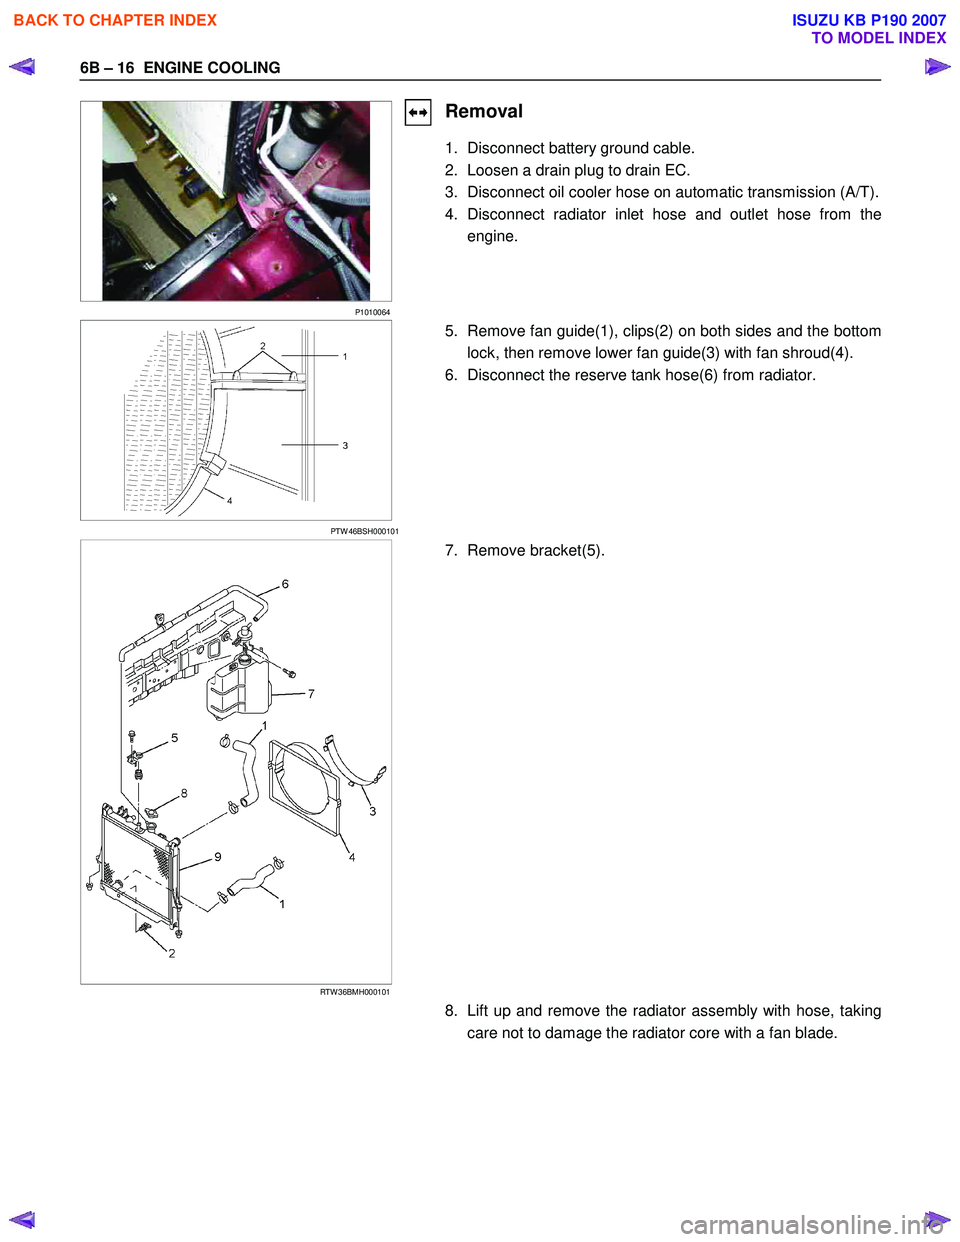 ISUZU KB P190 2007  Workshop Repair Manual 6B – 16  ENGINE COOLING 
 
P1010064 
Removal 
1.  Disconnect battery ground cable.  
2.  Loosen a drain plug to drain EC. 
3.  Disconnect oil cooler hose on automatic transmission (A/T).
4. Disconne